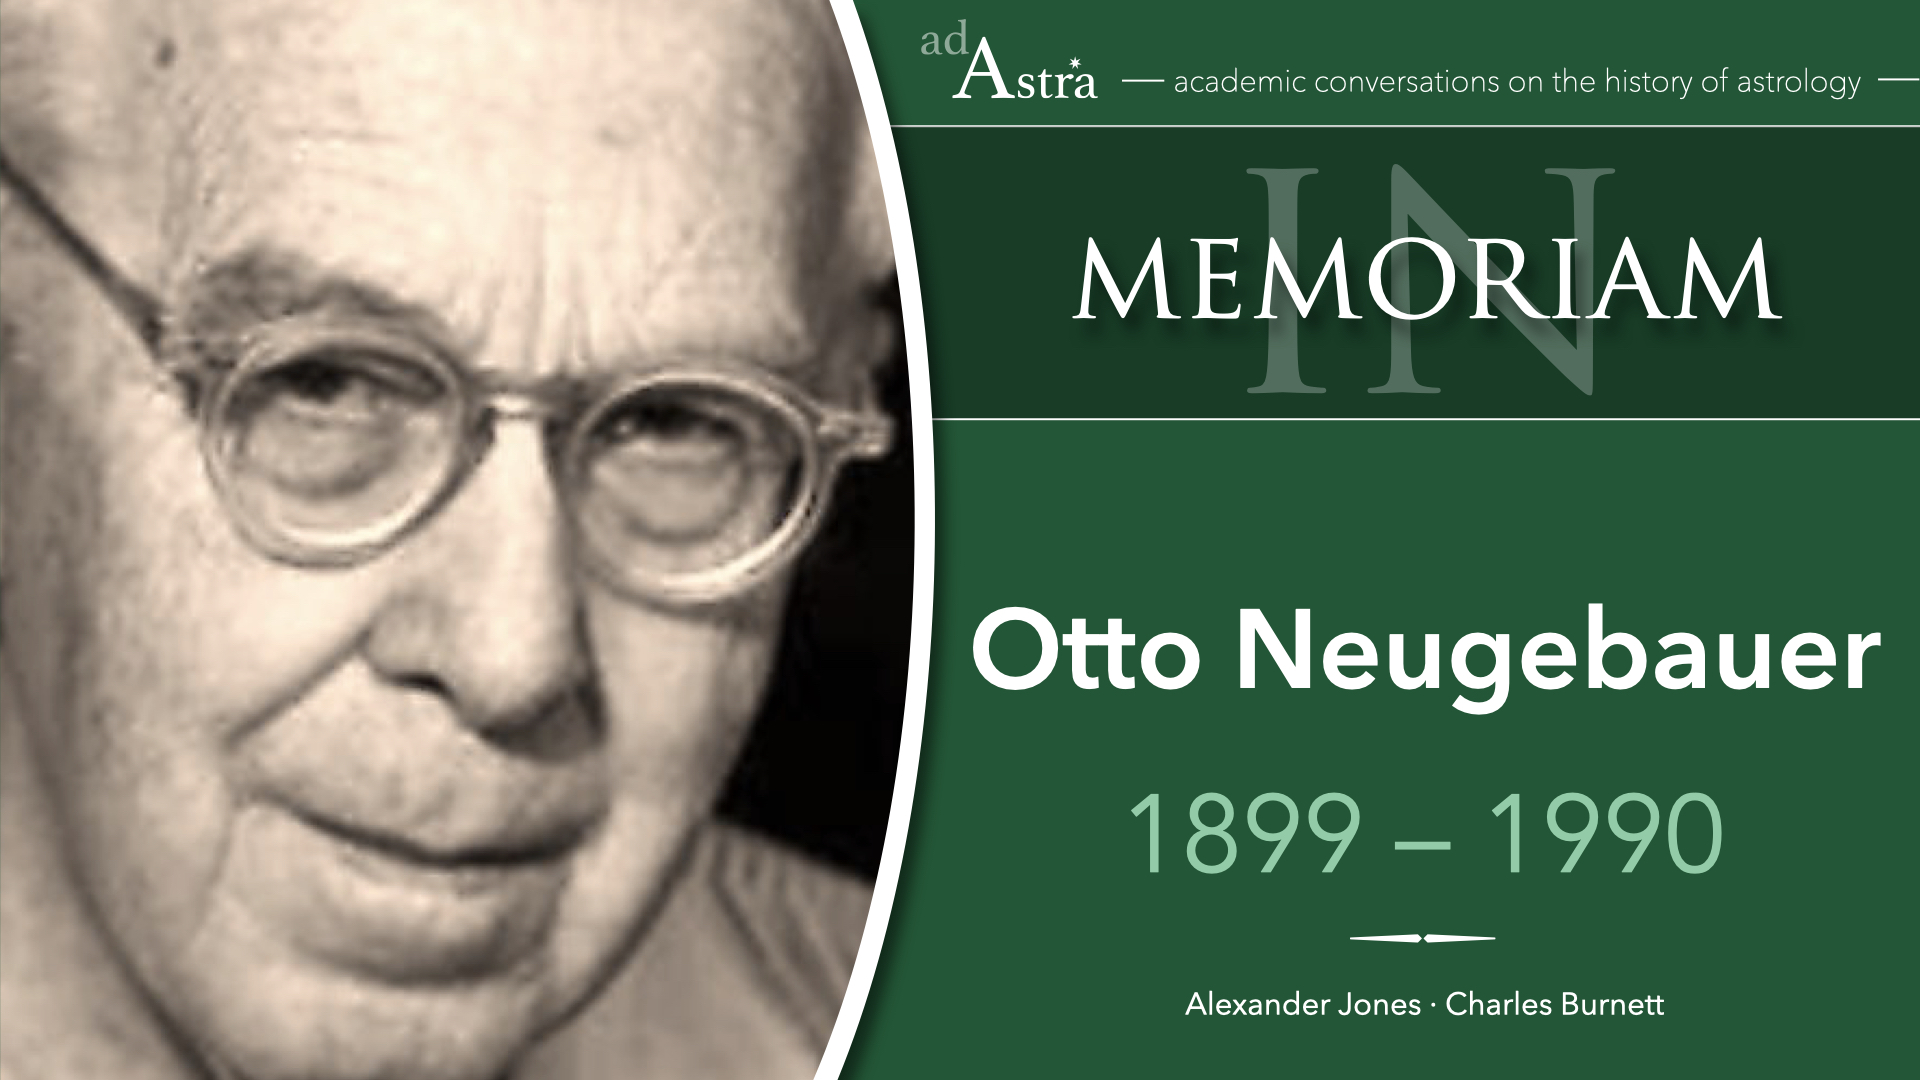 Otto Neugebauer (1899-1990): From Antiquity to the Renaissance